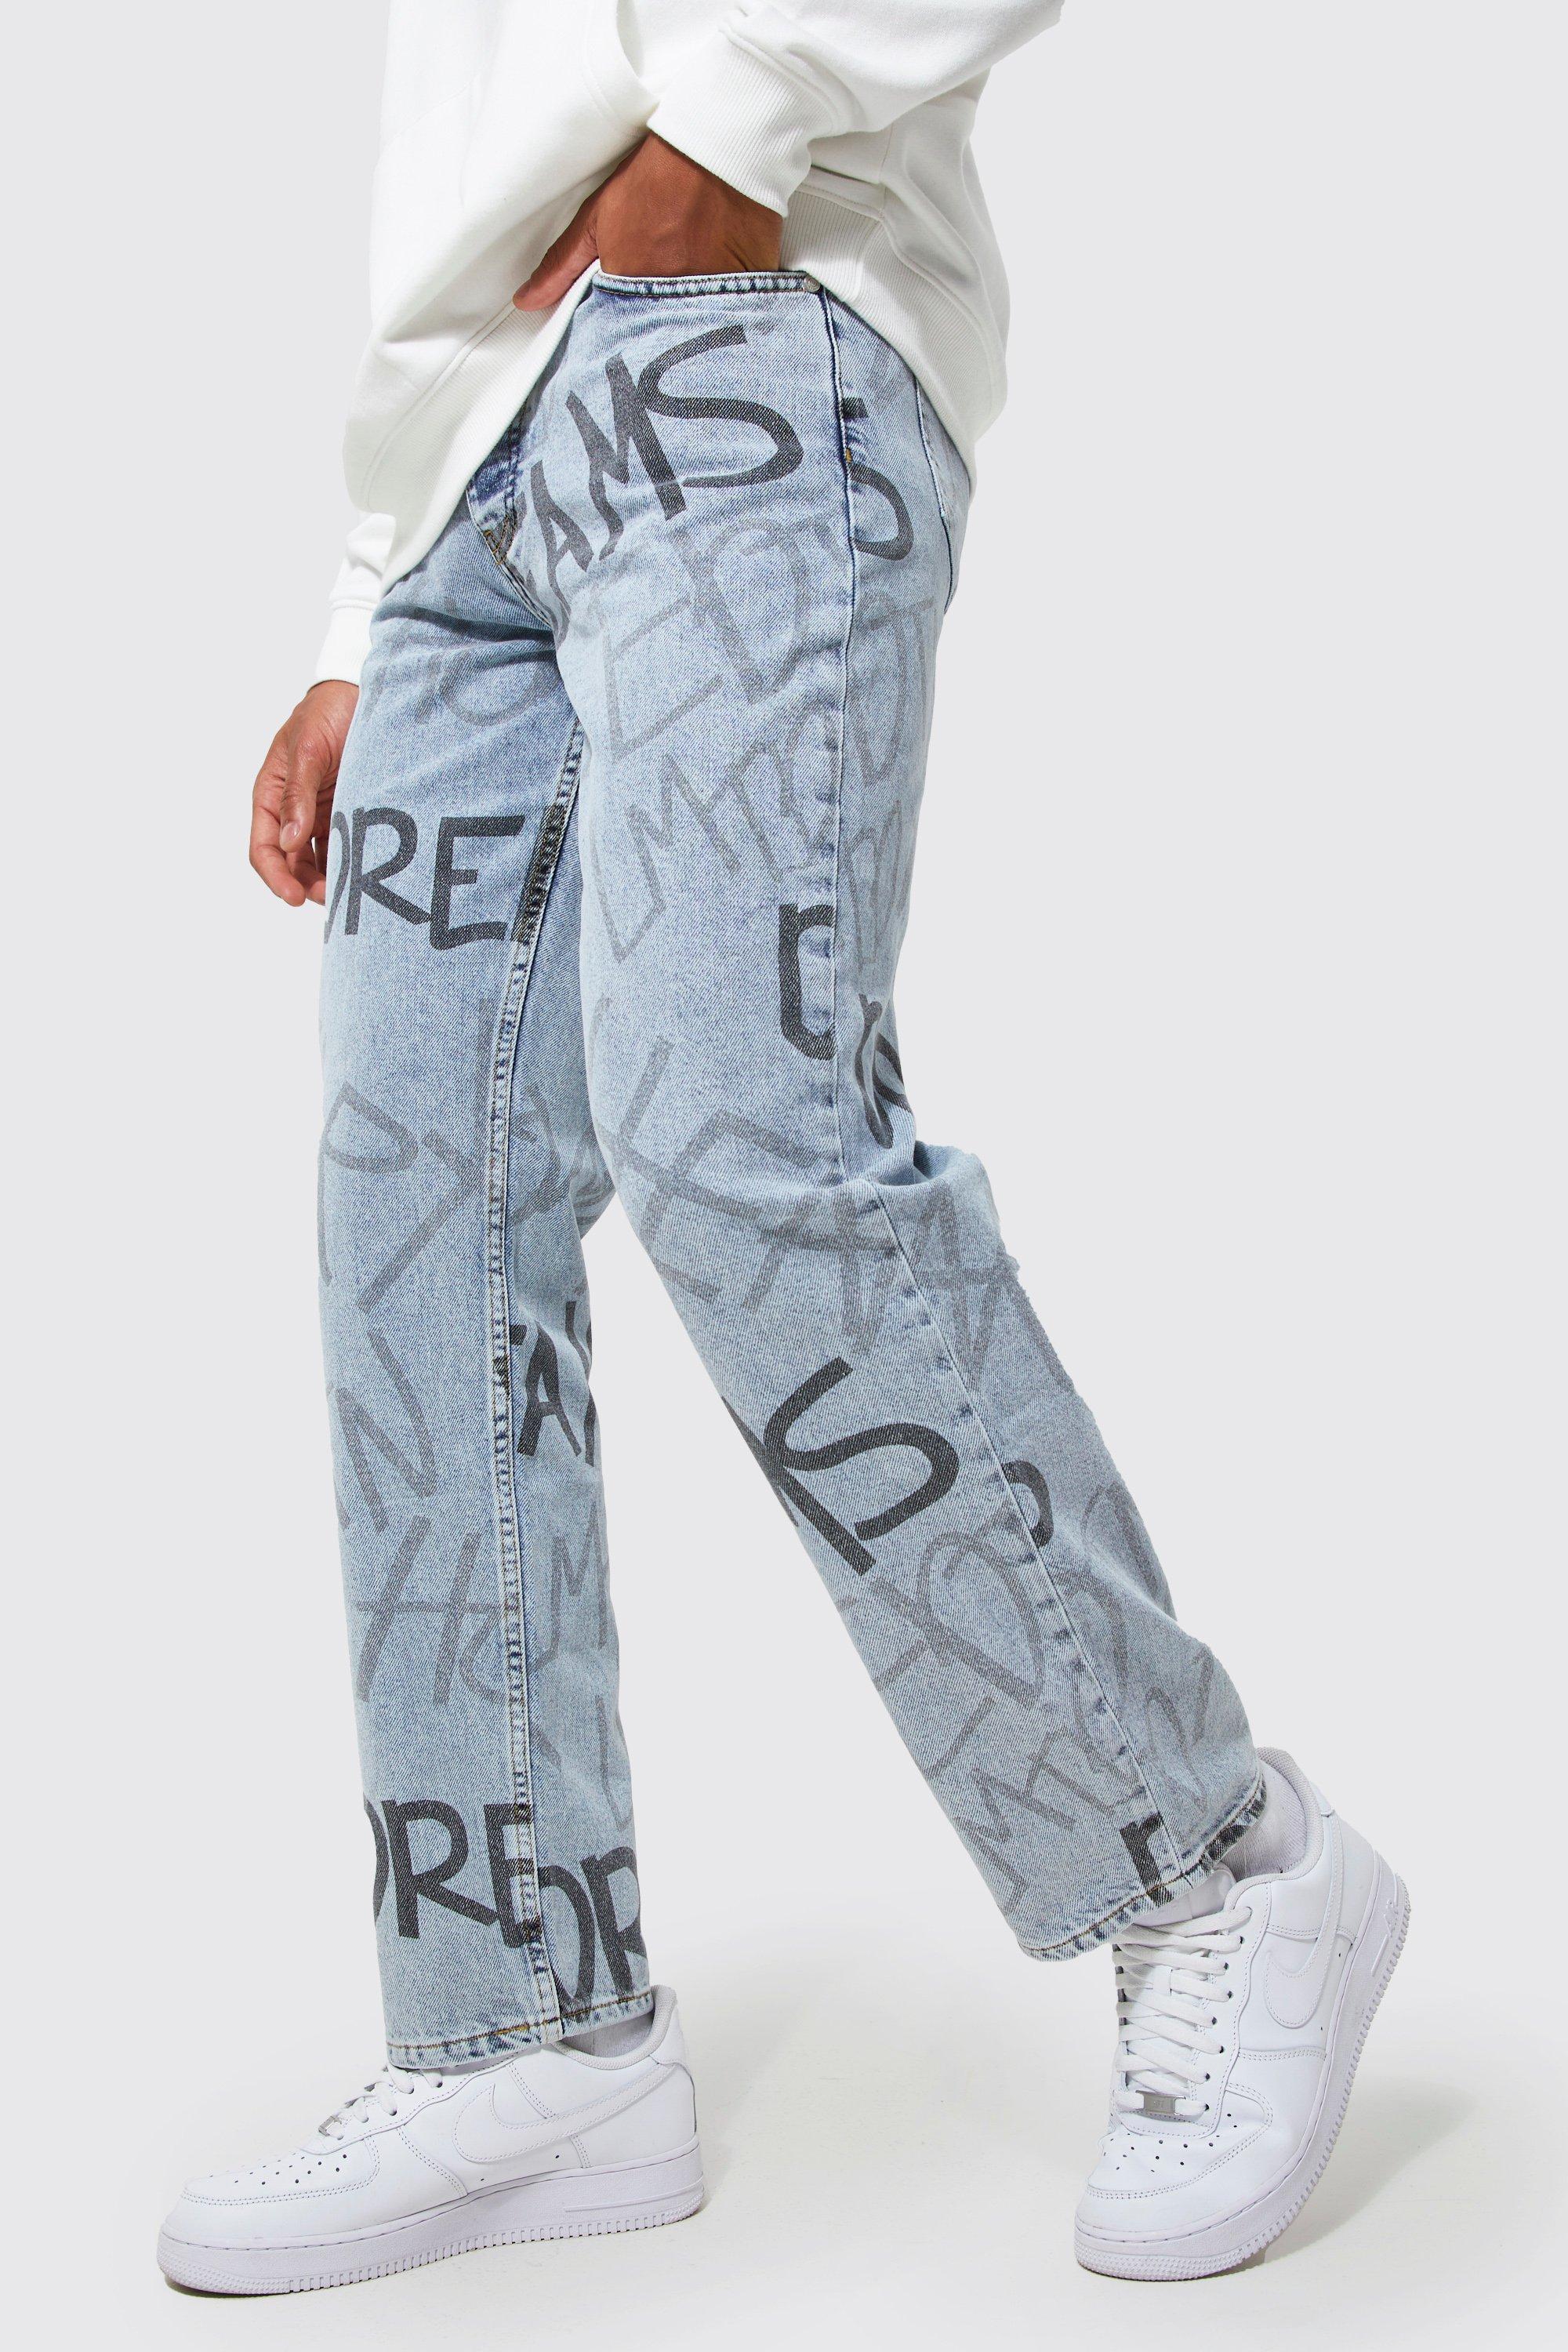 Relaxed Fit Graffiti Print Jeans boohooMAN USA